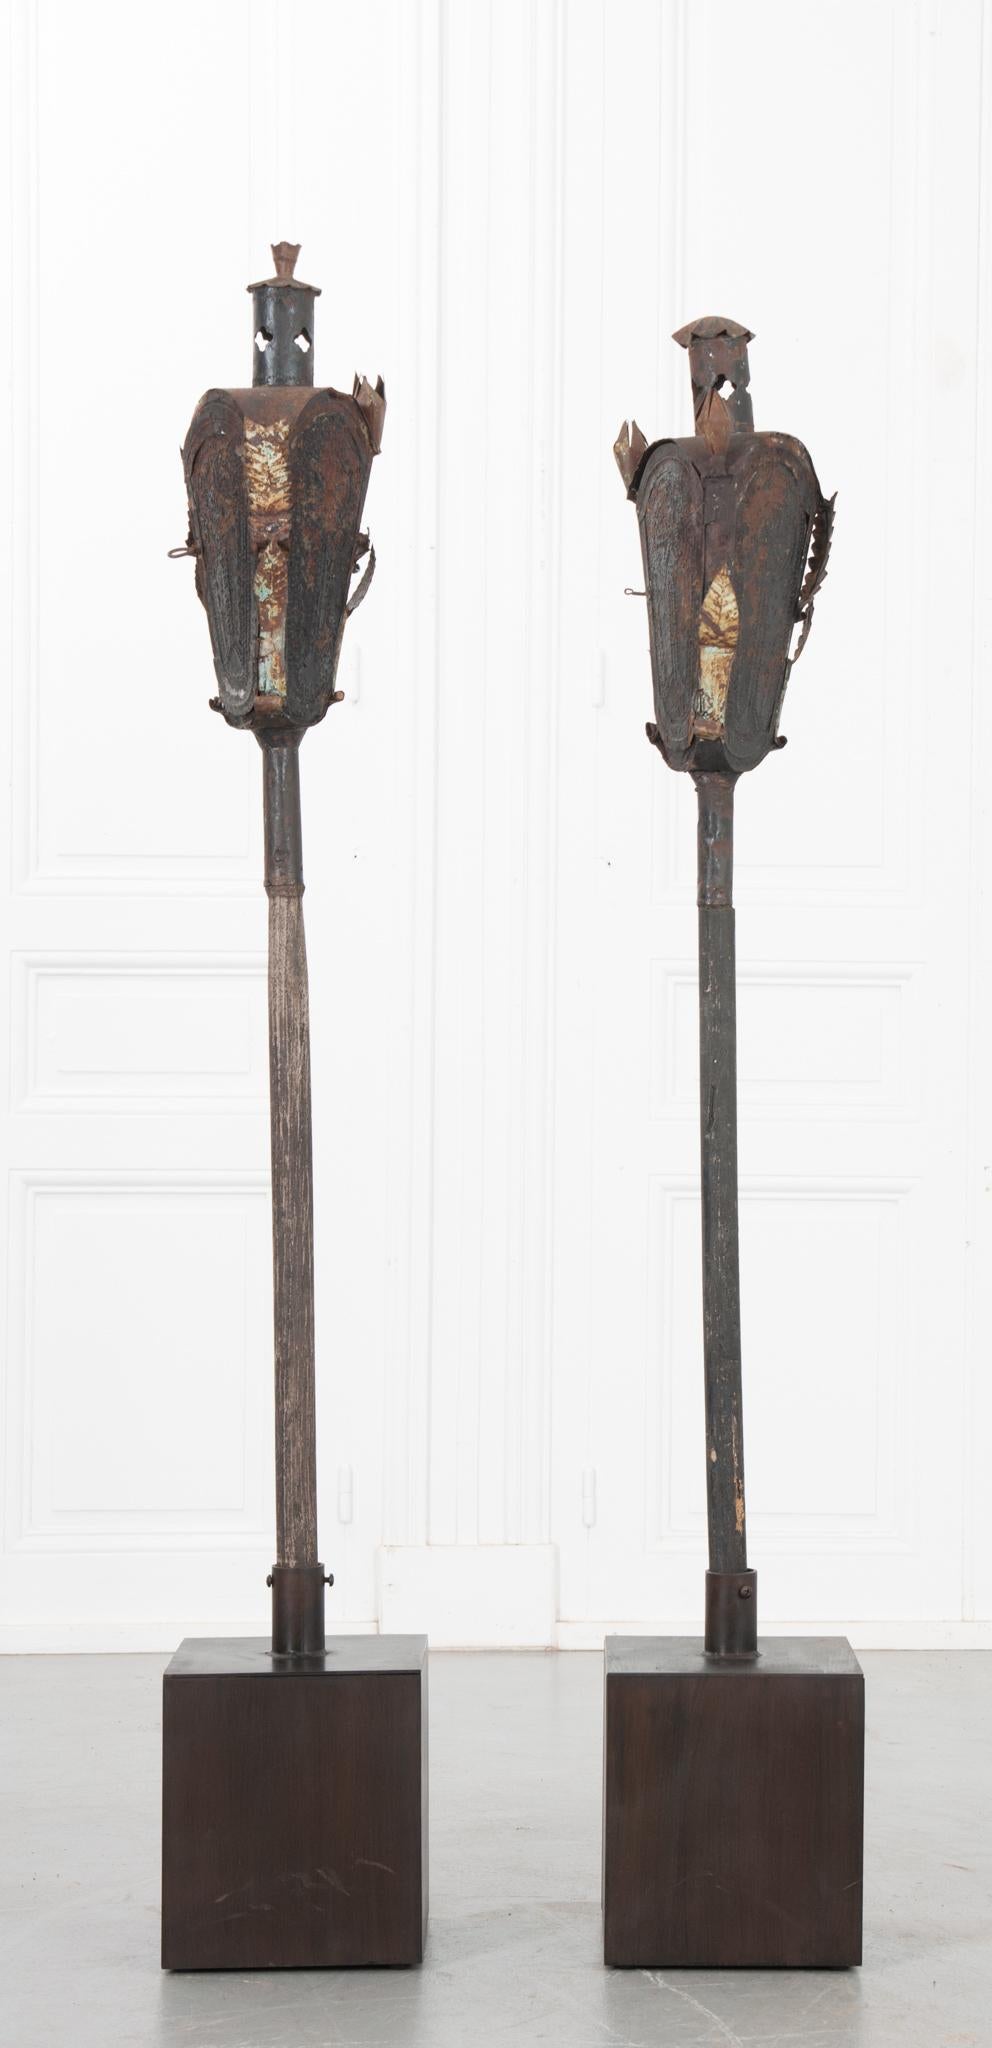 This is an incredibly unique pair of incense torches from Italy that have recently been fitted with new metal bases so they may stand-up alone. Made of painted metal and wood that’s been worn away with time and use, the distress gives it the perfect